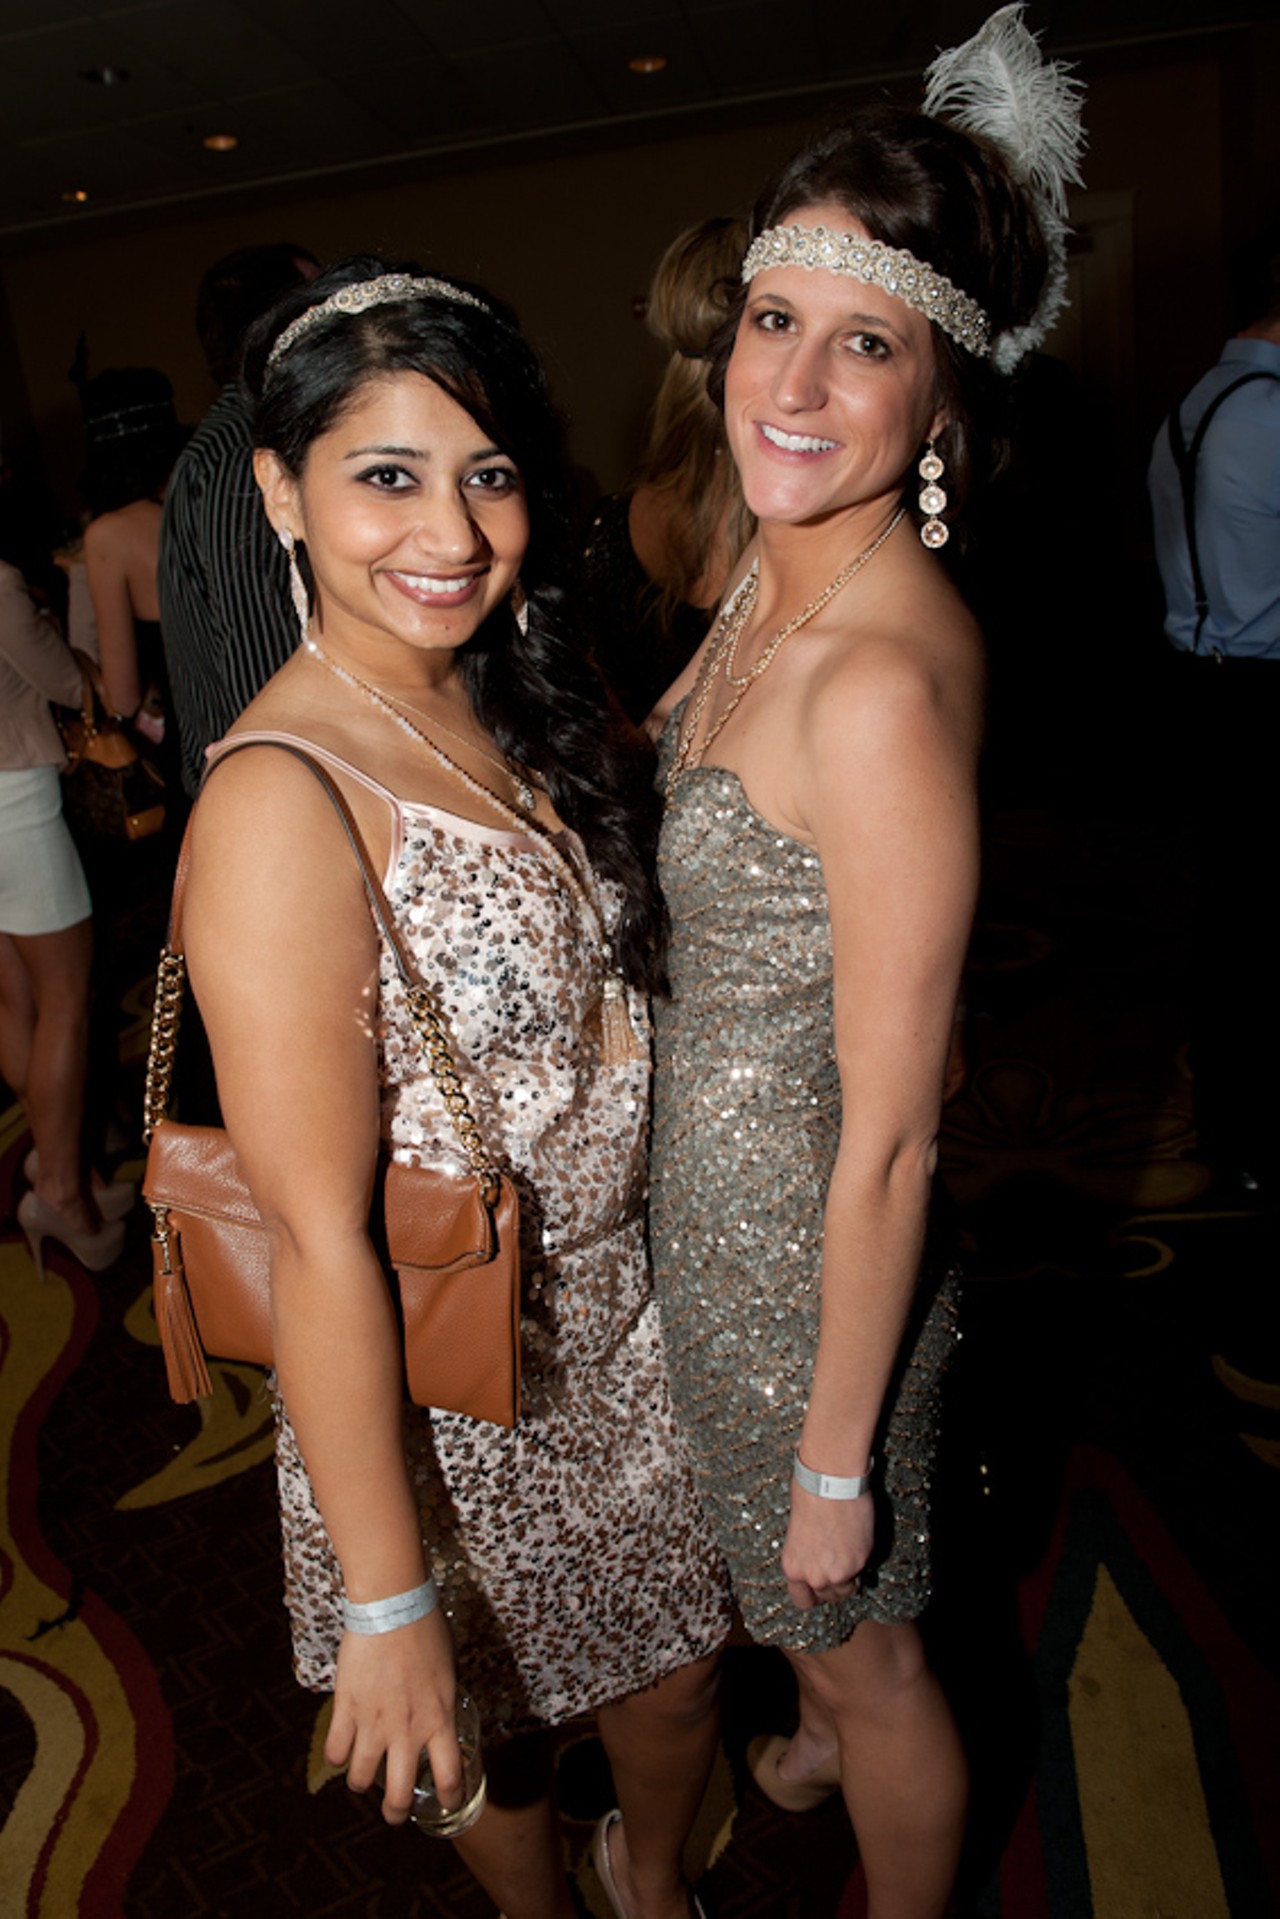 A Roaring '20s New Year's Eve at the Chase